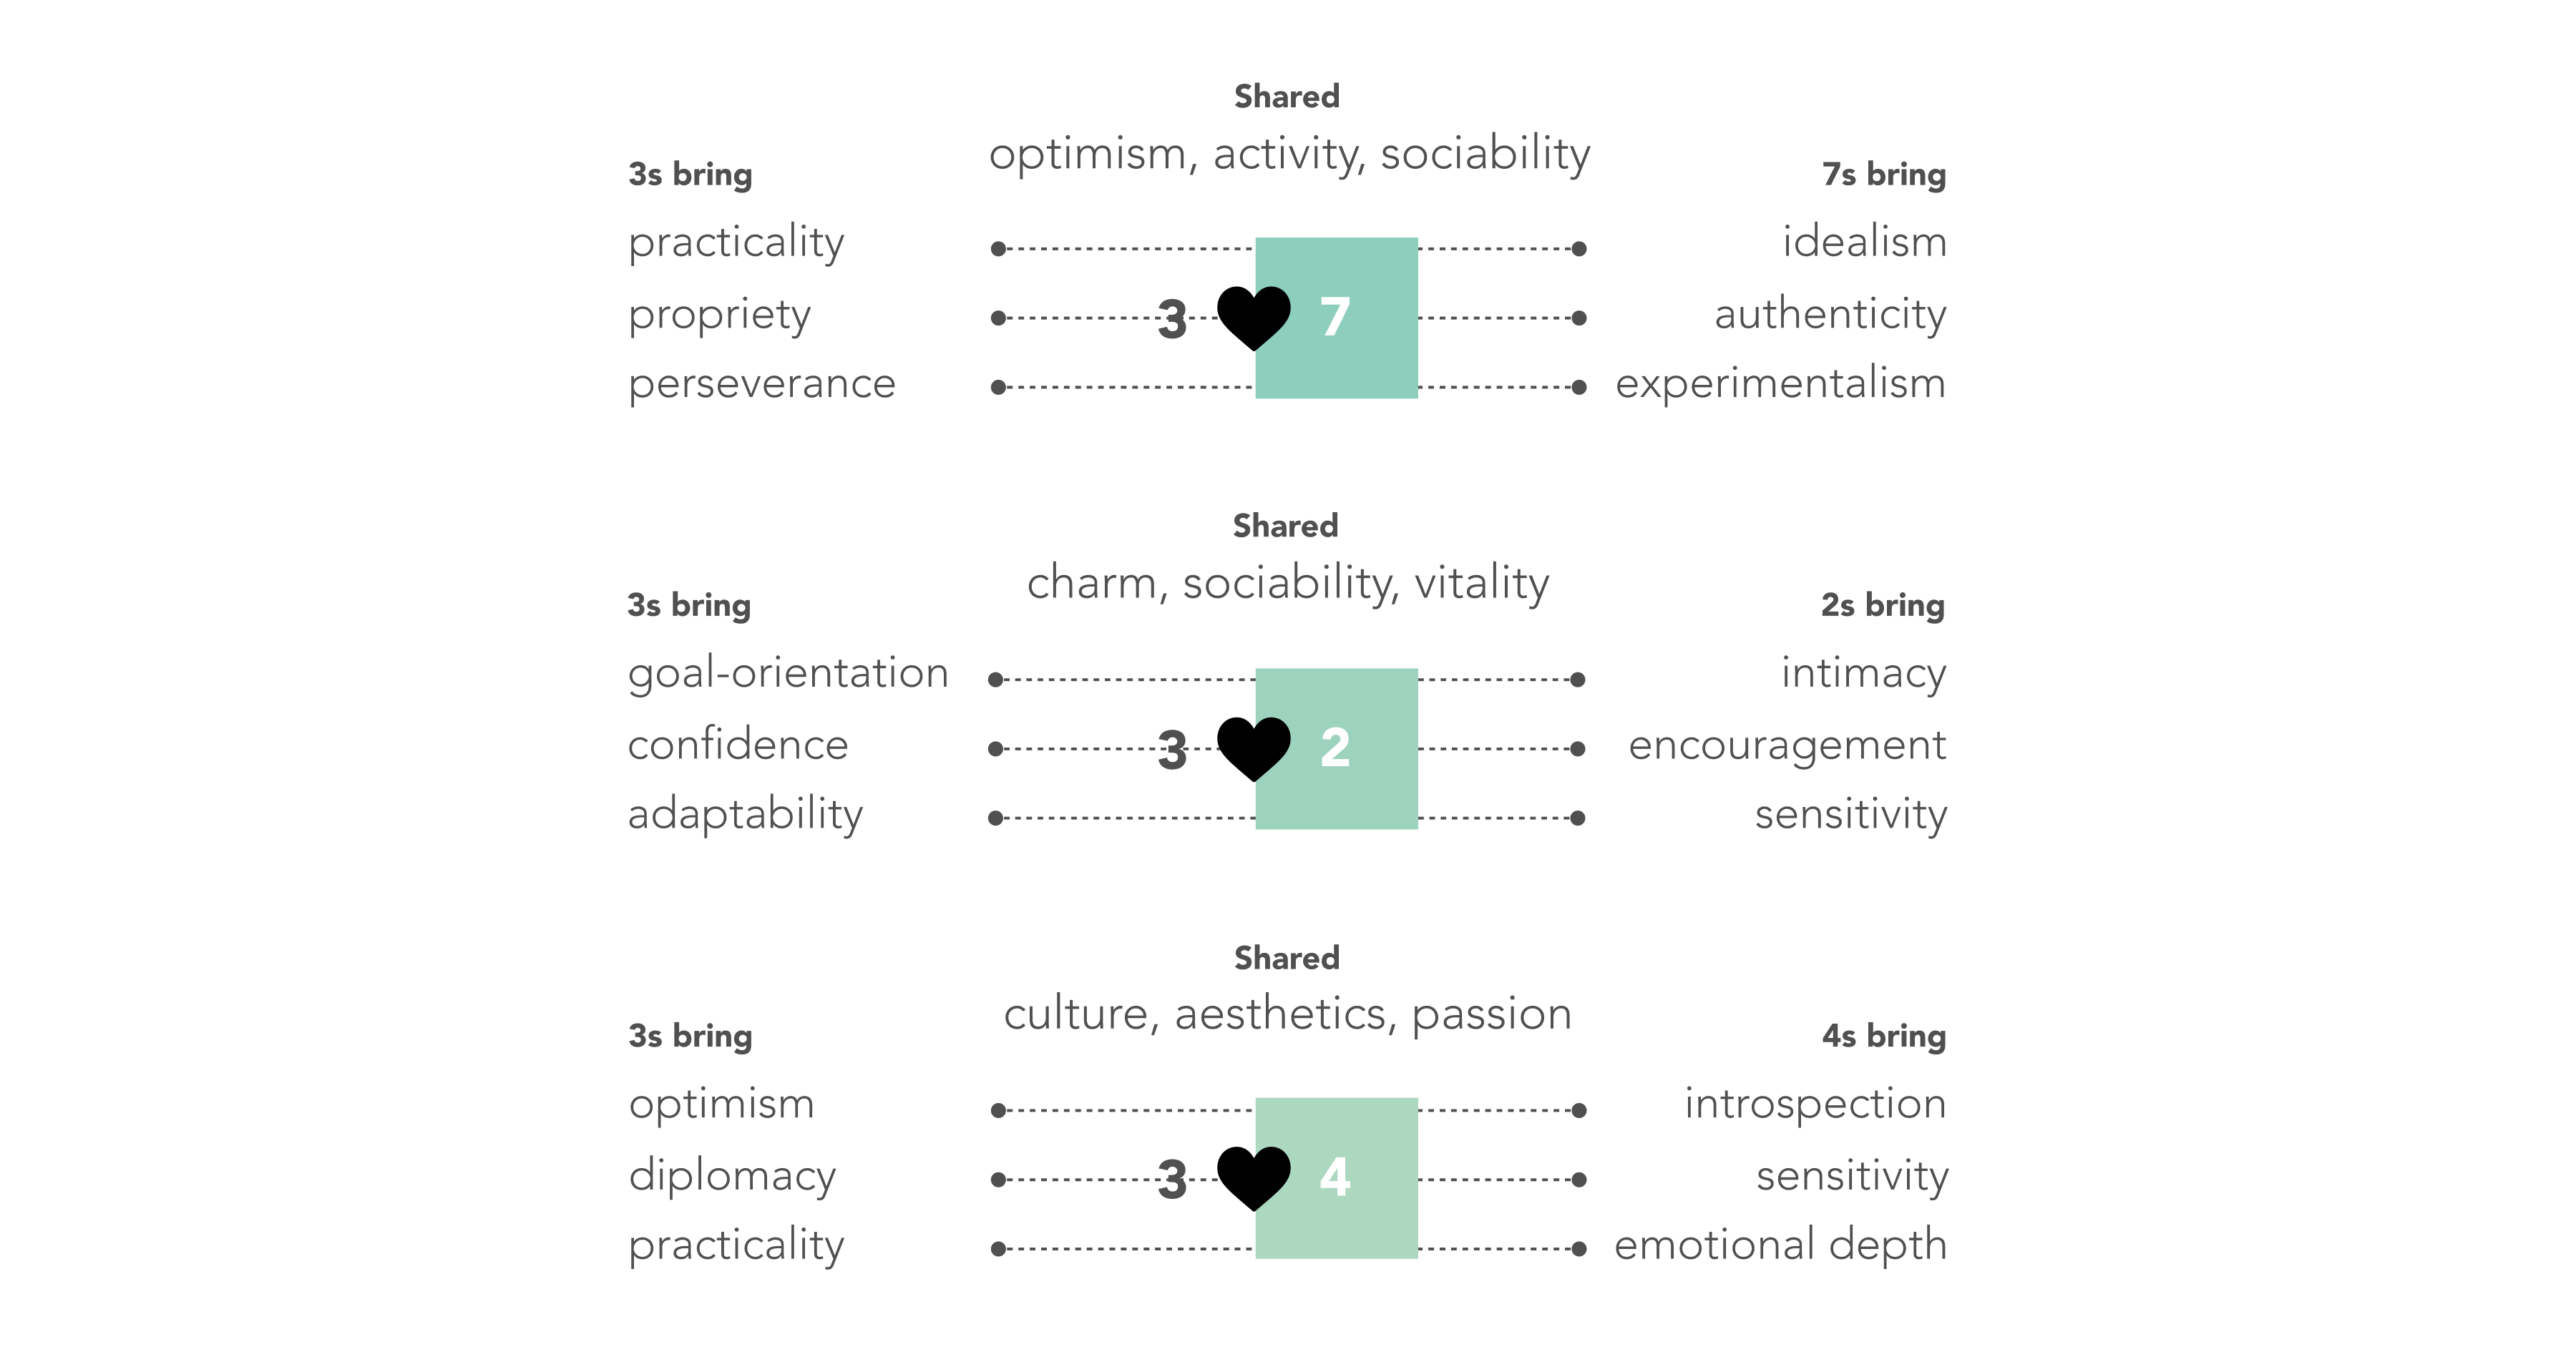 3s and 7s share optimism, activity, sociability. 3s bring practicality, propriety, perseverance, while 7s bring idealism, authenticity, experimentalism. 3s and 2s share charm, sociability, vitality. 3s bring goal-orientation, confidence, adaptability, while 2s bring intimacy, encouragement, sensitivity. 3s and 4s share culture, aesthetics, passion. 3s bring optimism, diplomacy, practicality, while 4s bring introspection, sensitivity, emotional depth.